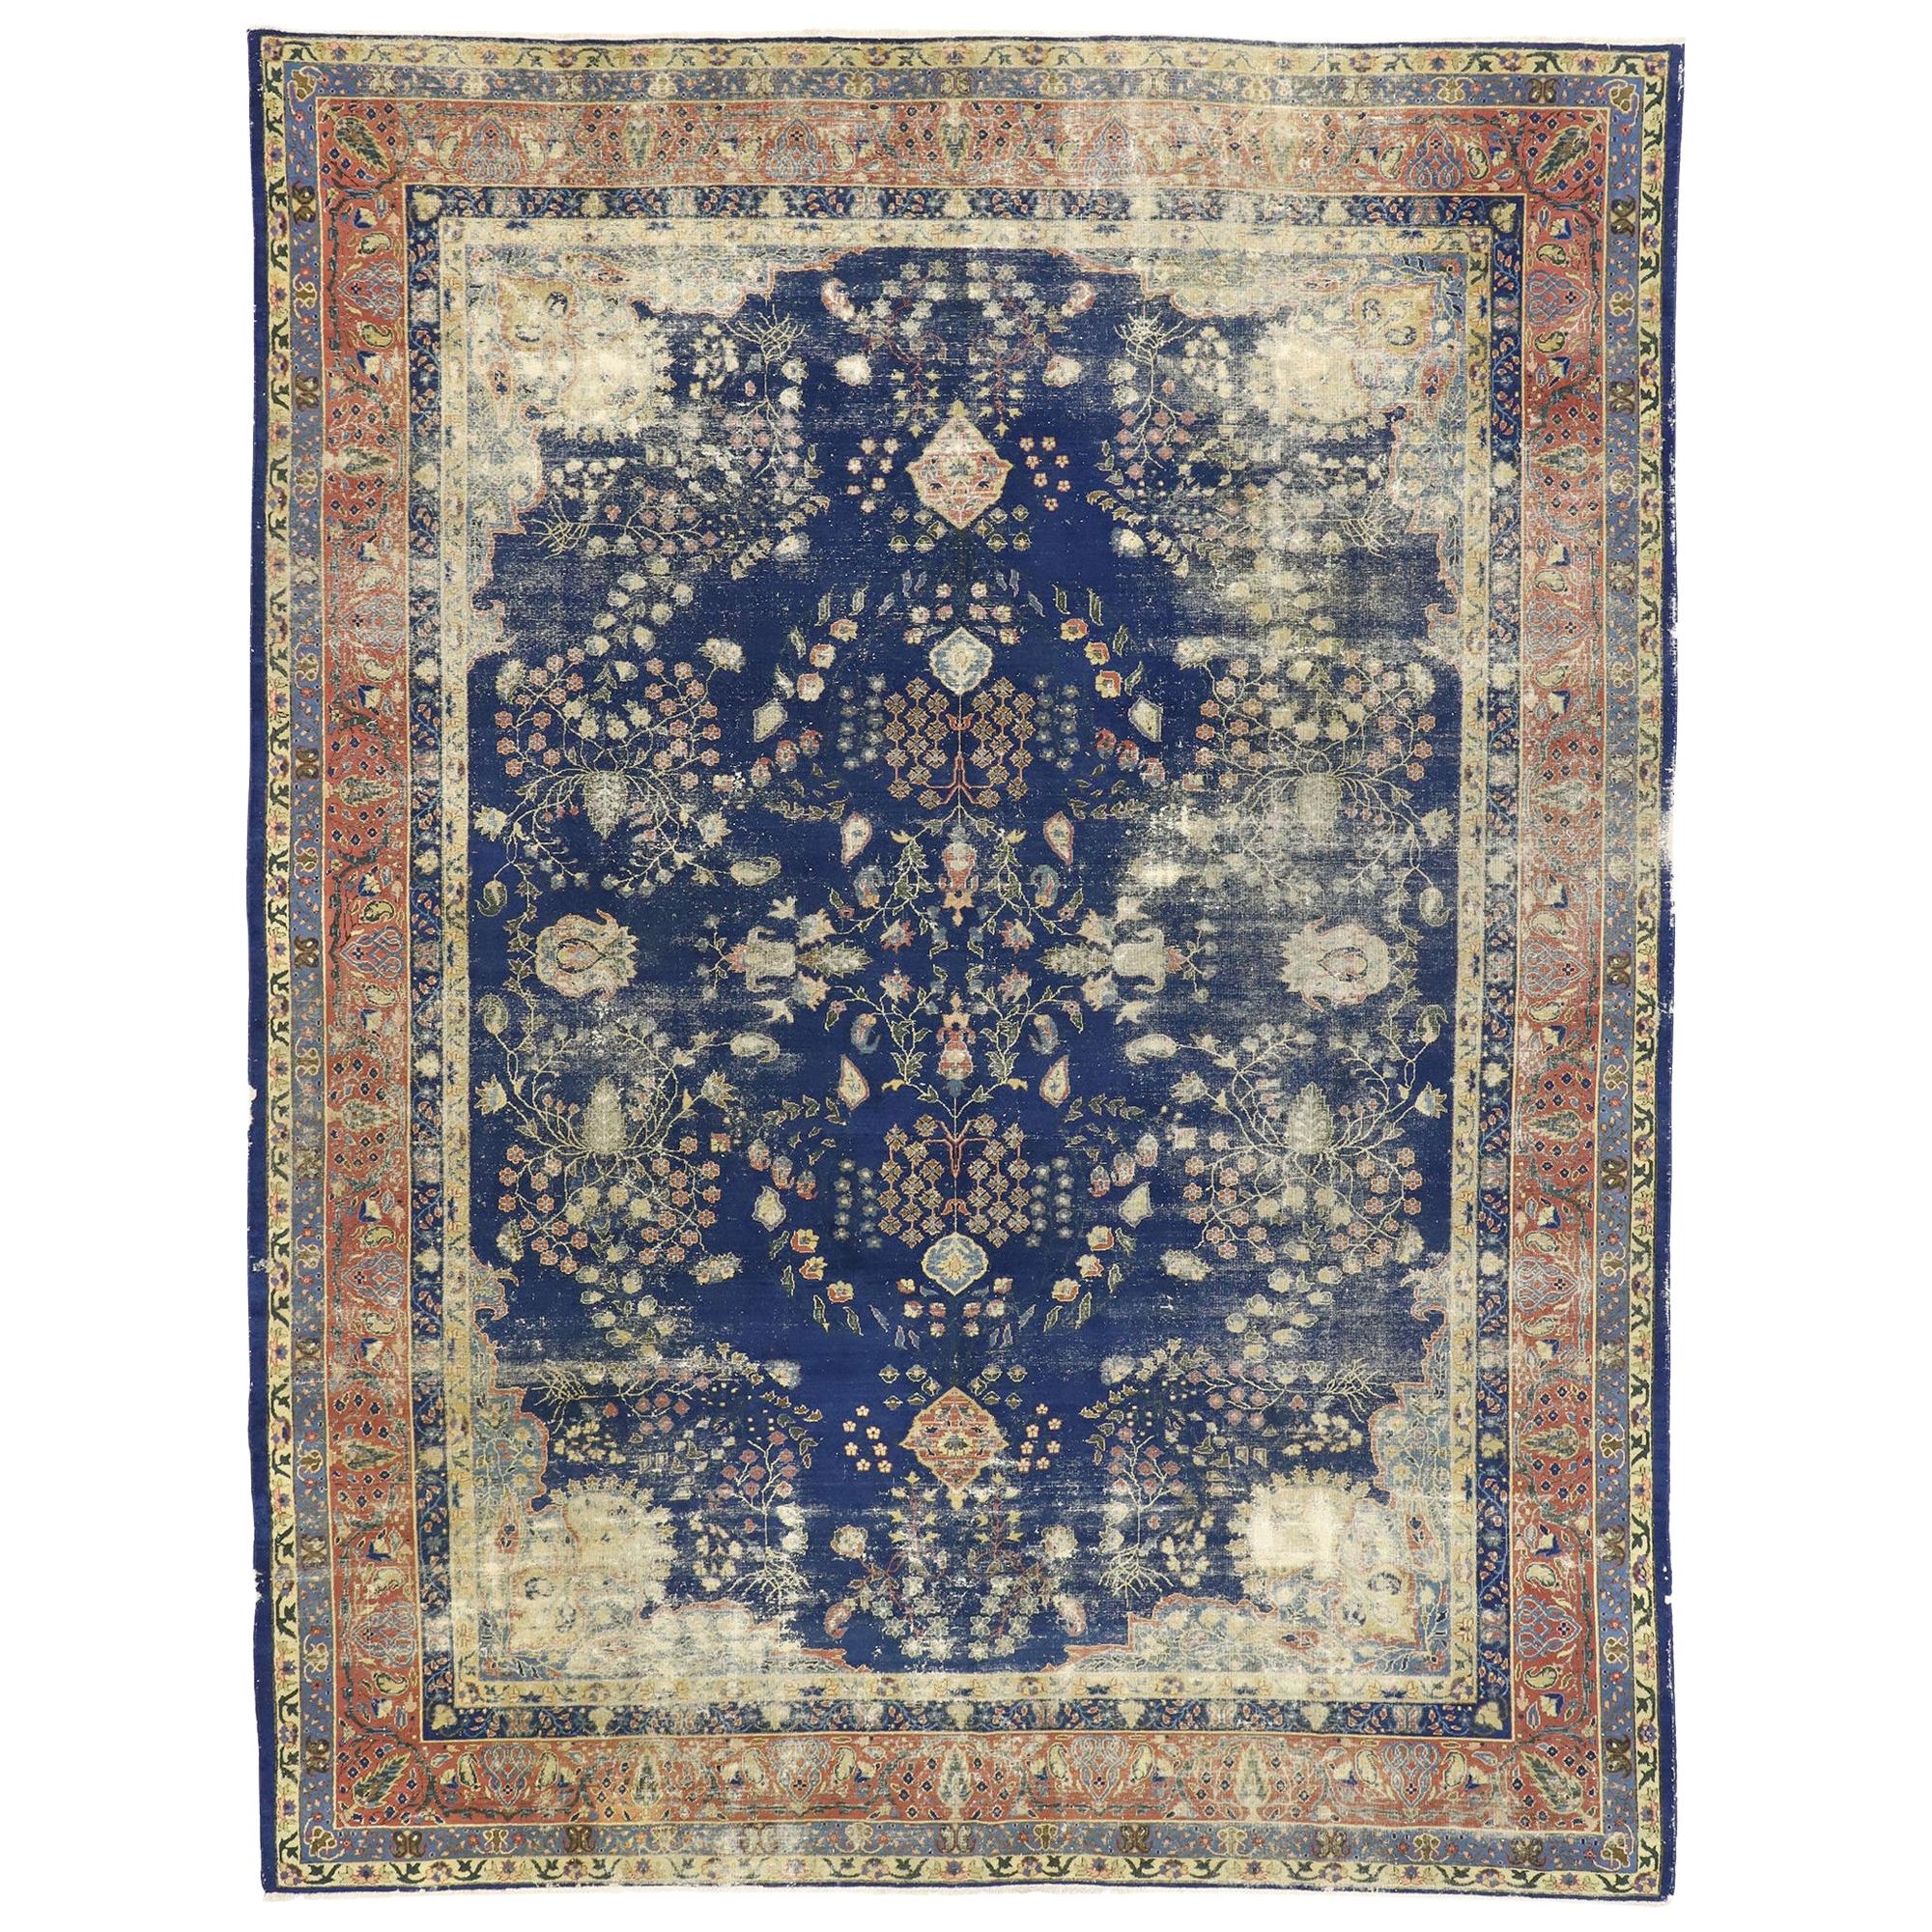 Distressed Antique Turkish Sparta Rug with Modern Rustic English Style